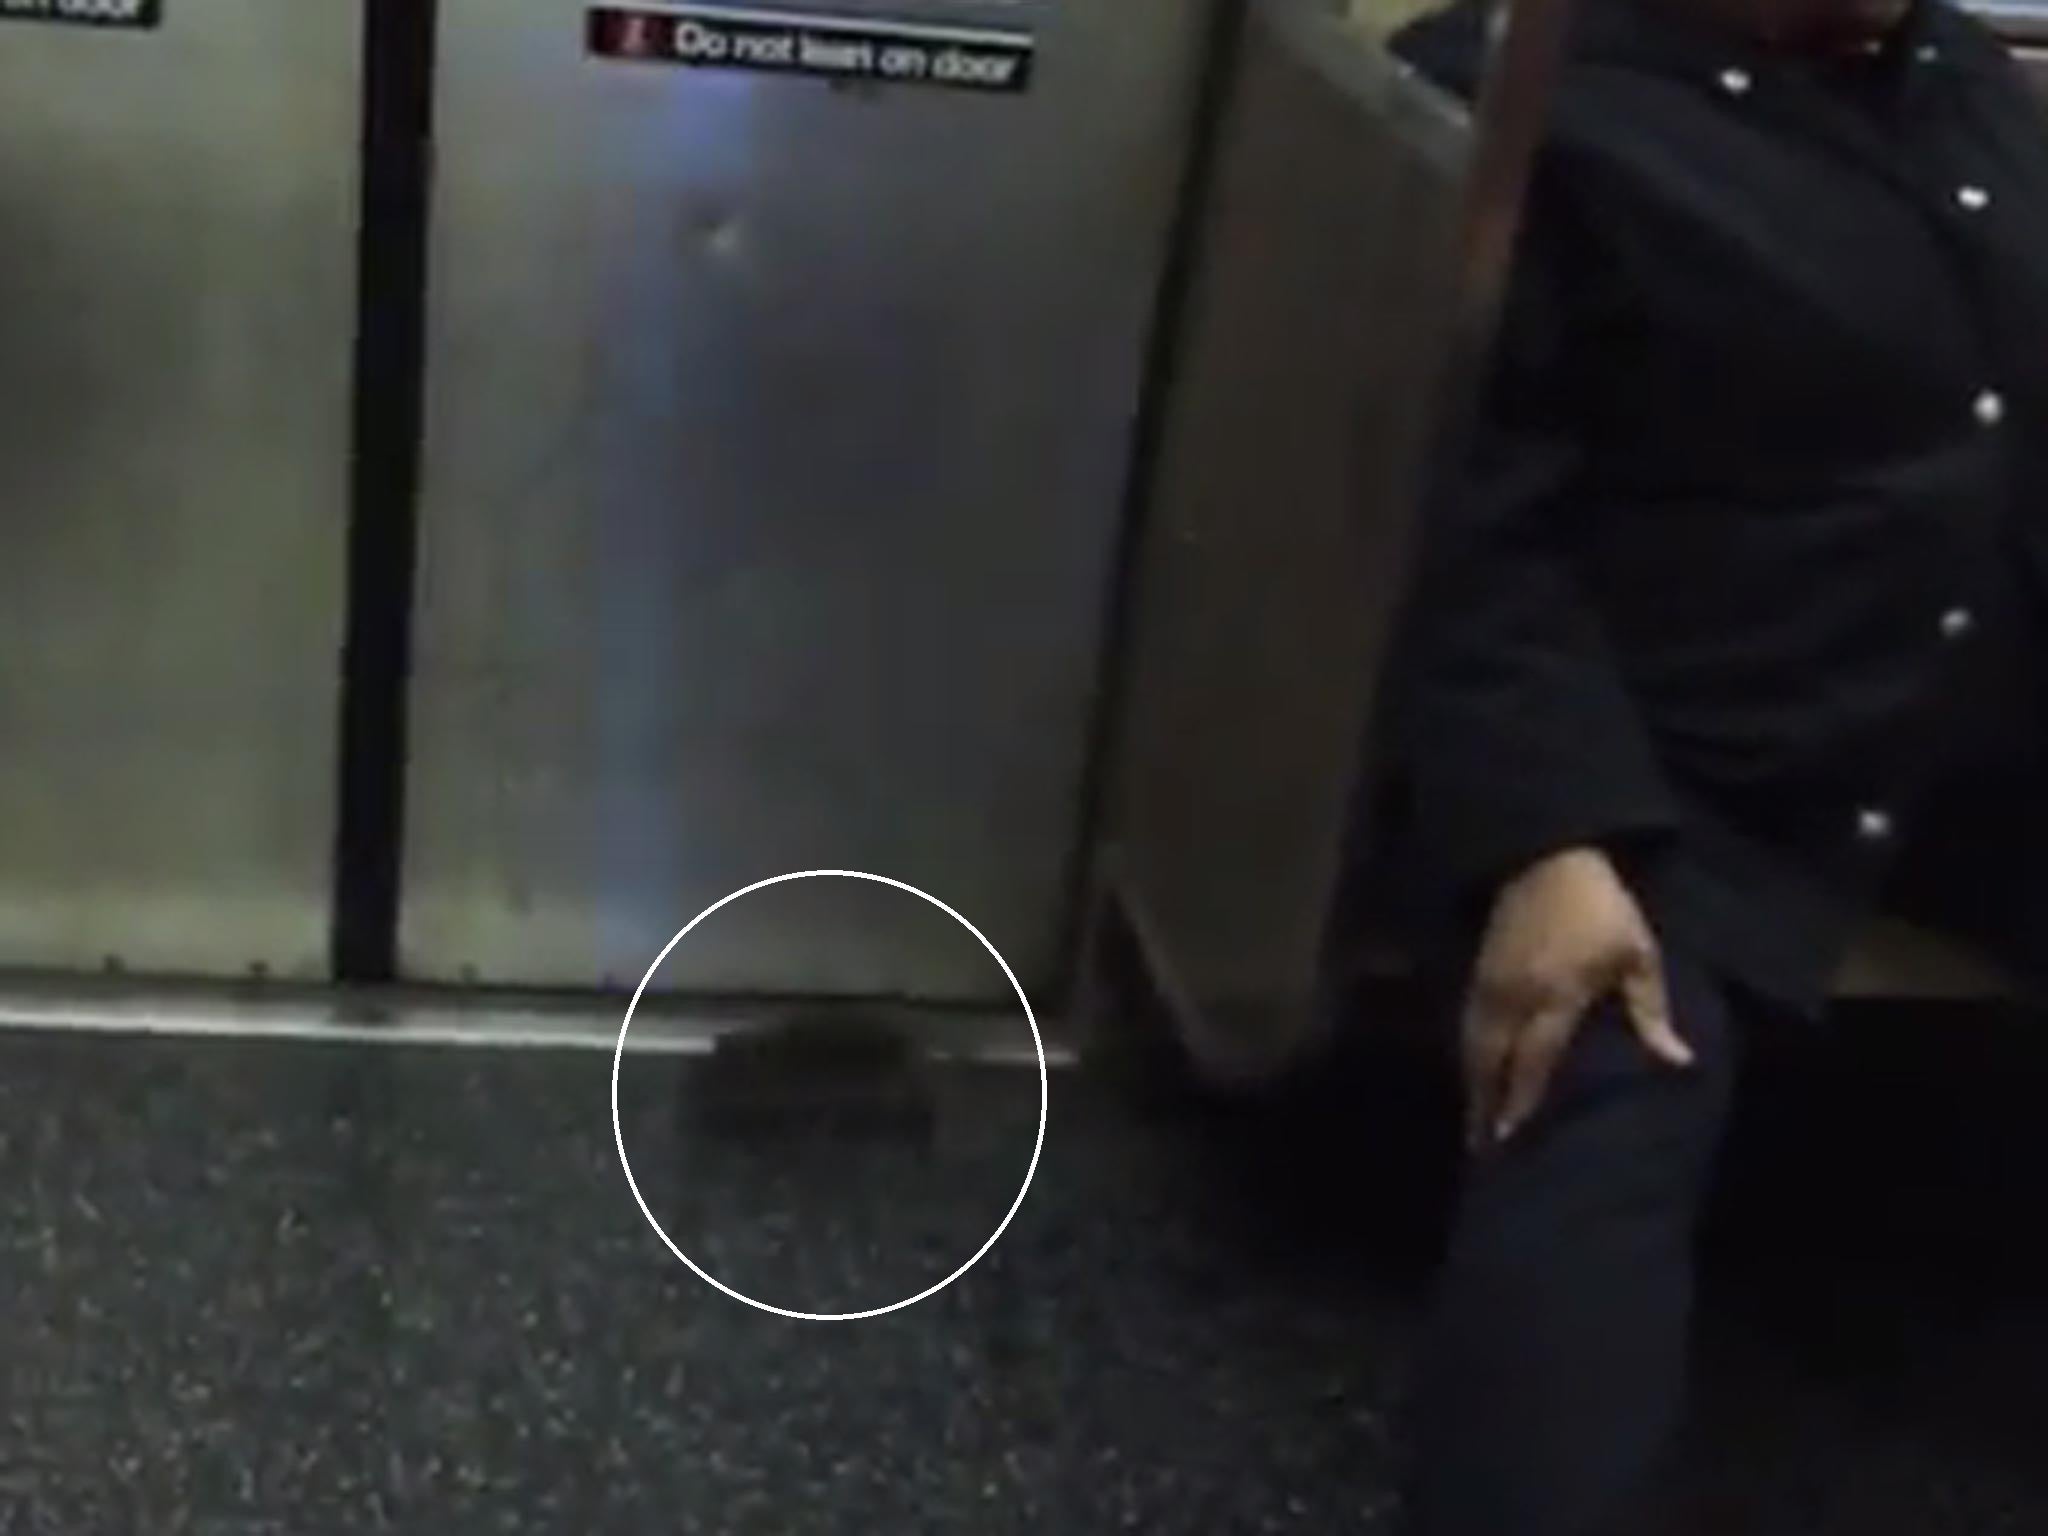 The rat rushes across the carriage, leaving passengers scared for their lives